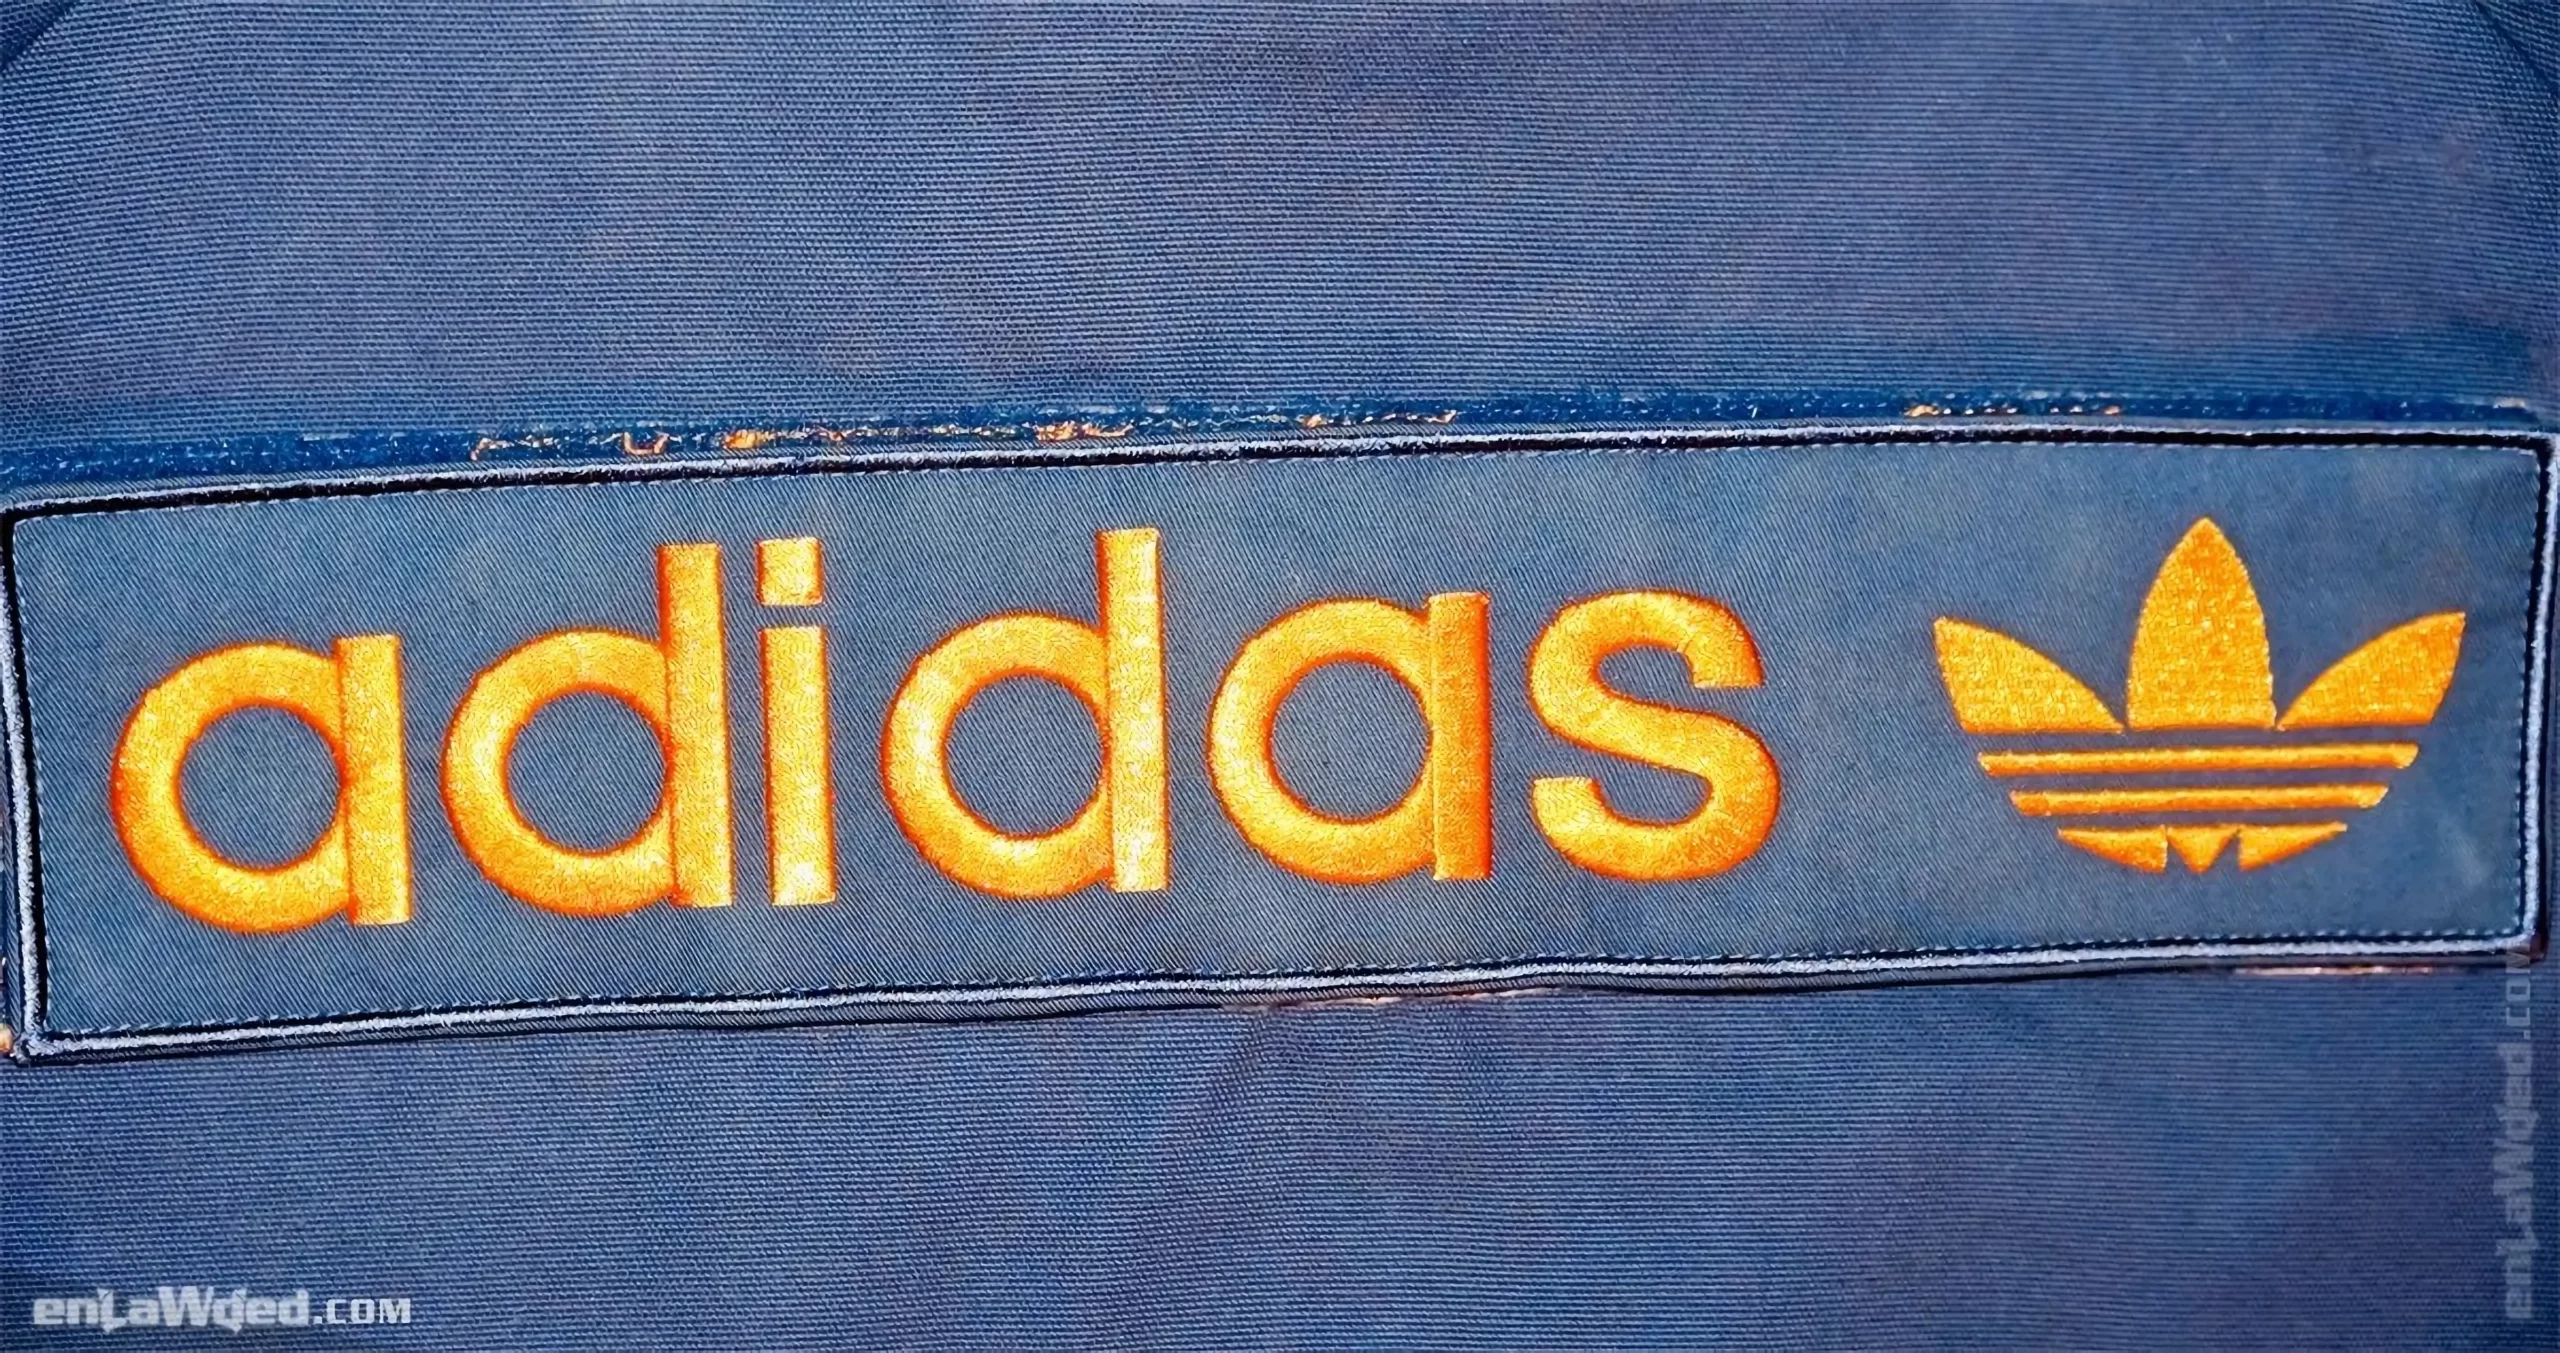 Men’s 2005 Adidas Originals Military Peace Jacket: Unstoppable (EnLawded.com file #lmchbmnot28ldias3dh)